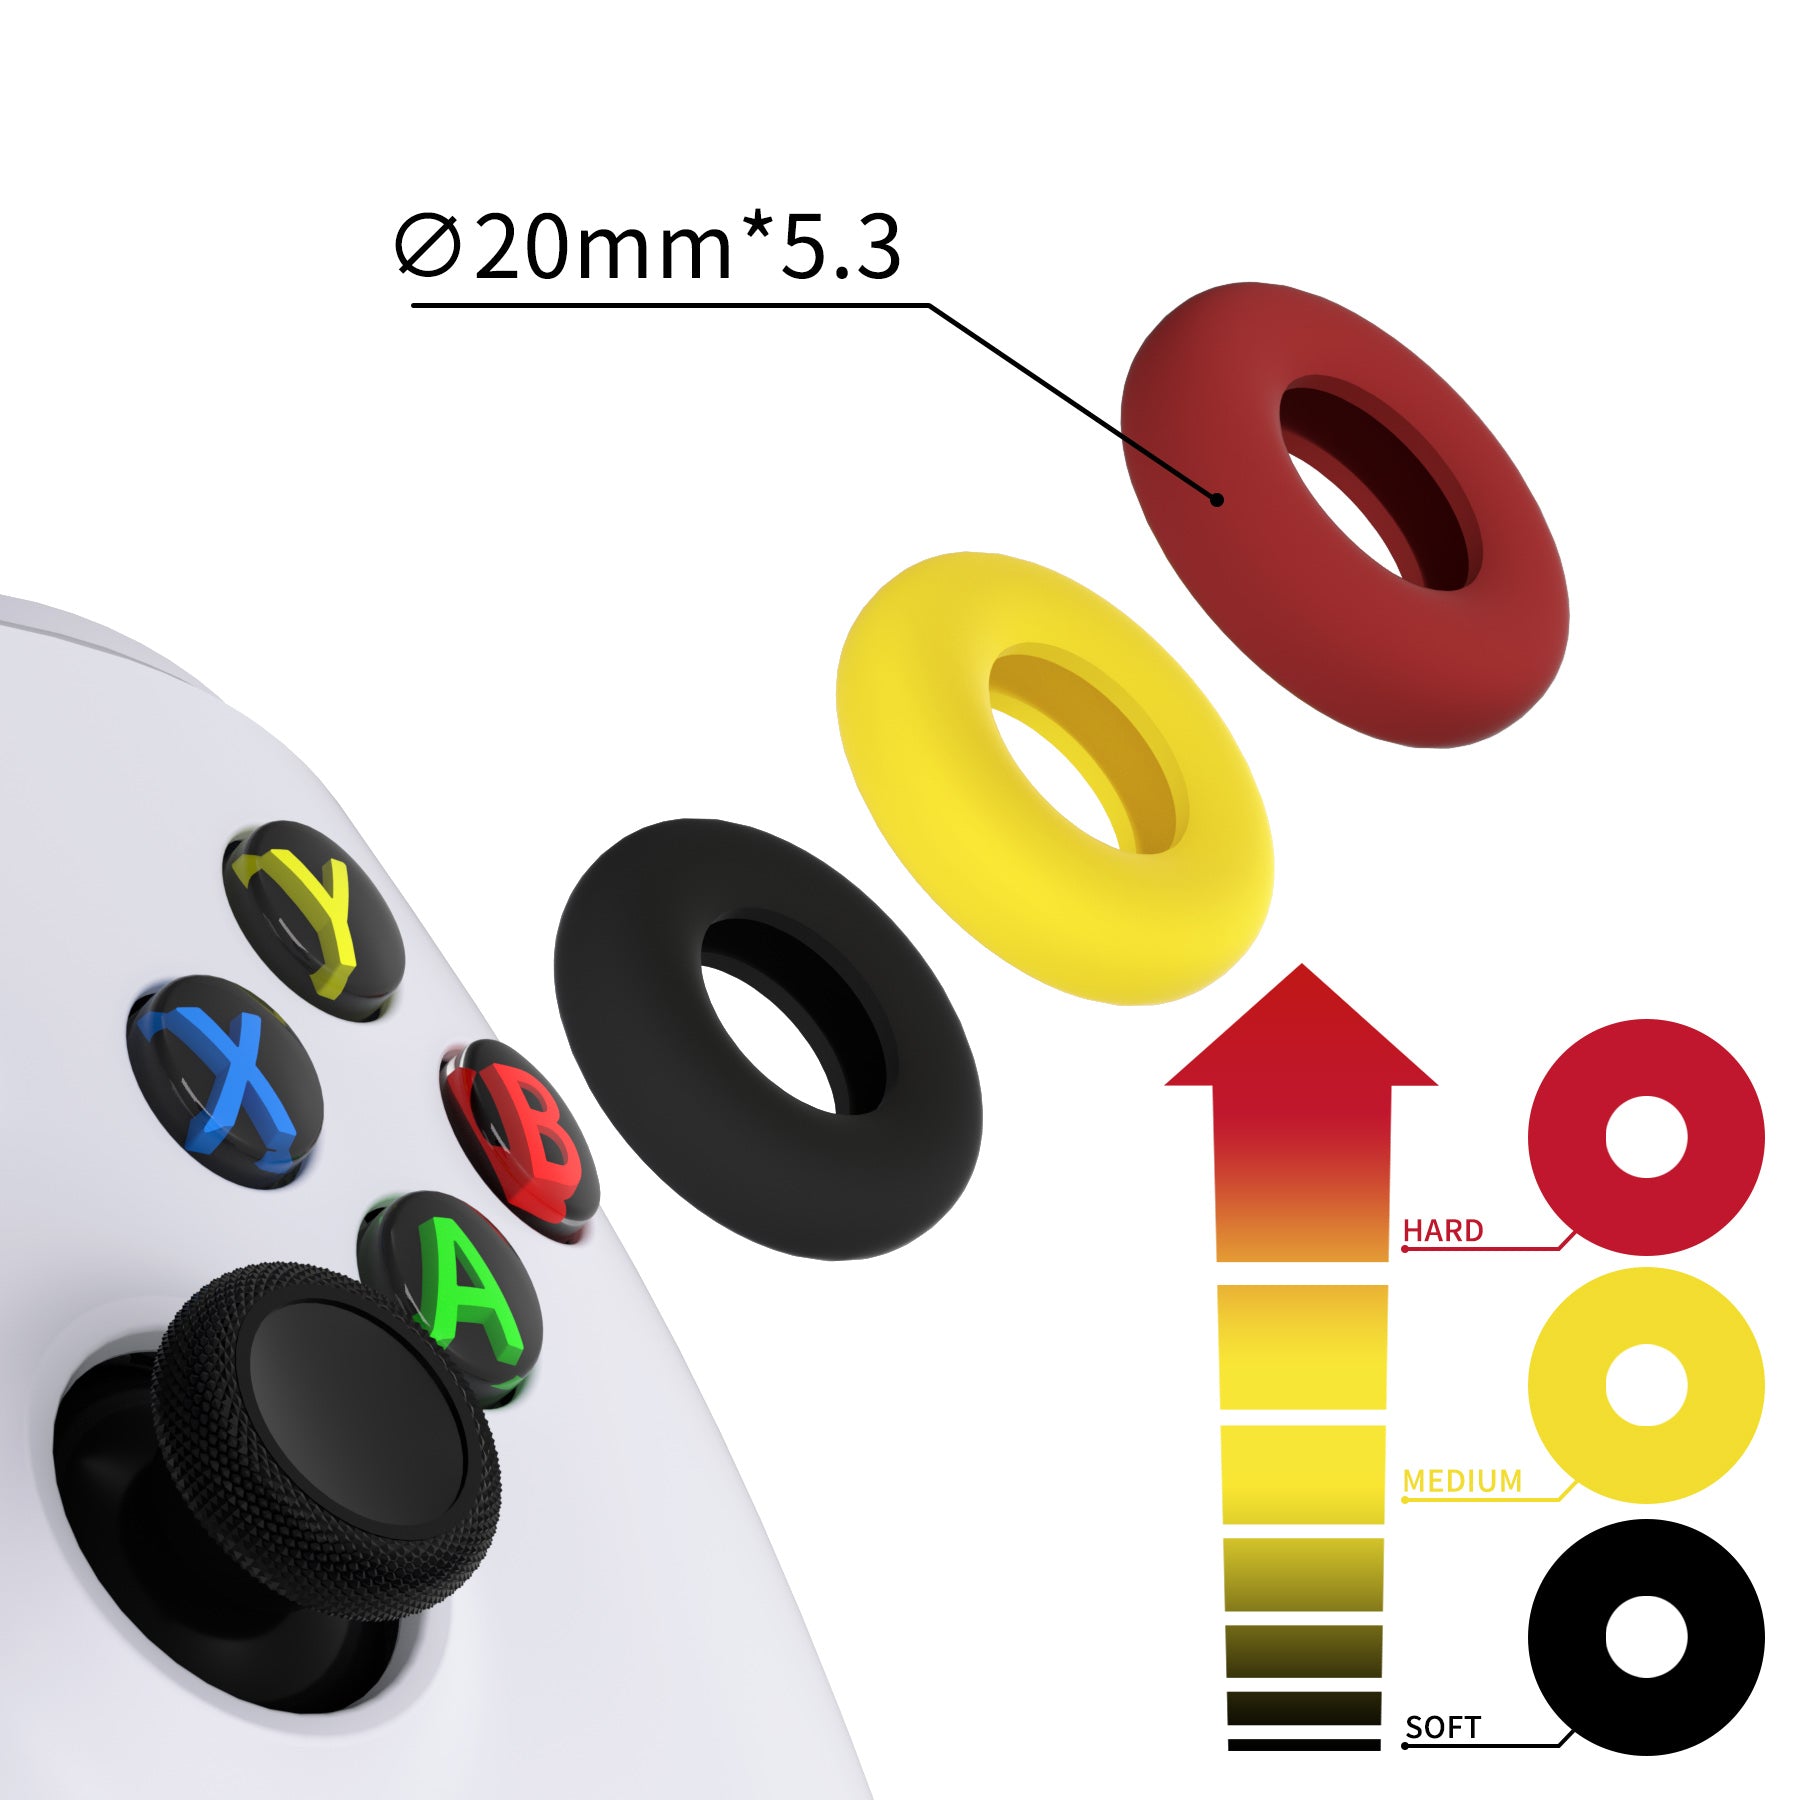  OniAim Precision Rings Gray Demon AIM Assist Motion Control  Accessories for PS5, PS4, Xbox Series, PC Gamepads, Switch Pro Controller &  Scuf Controller (Soft) : Video Games